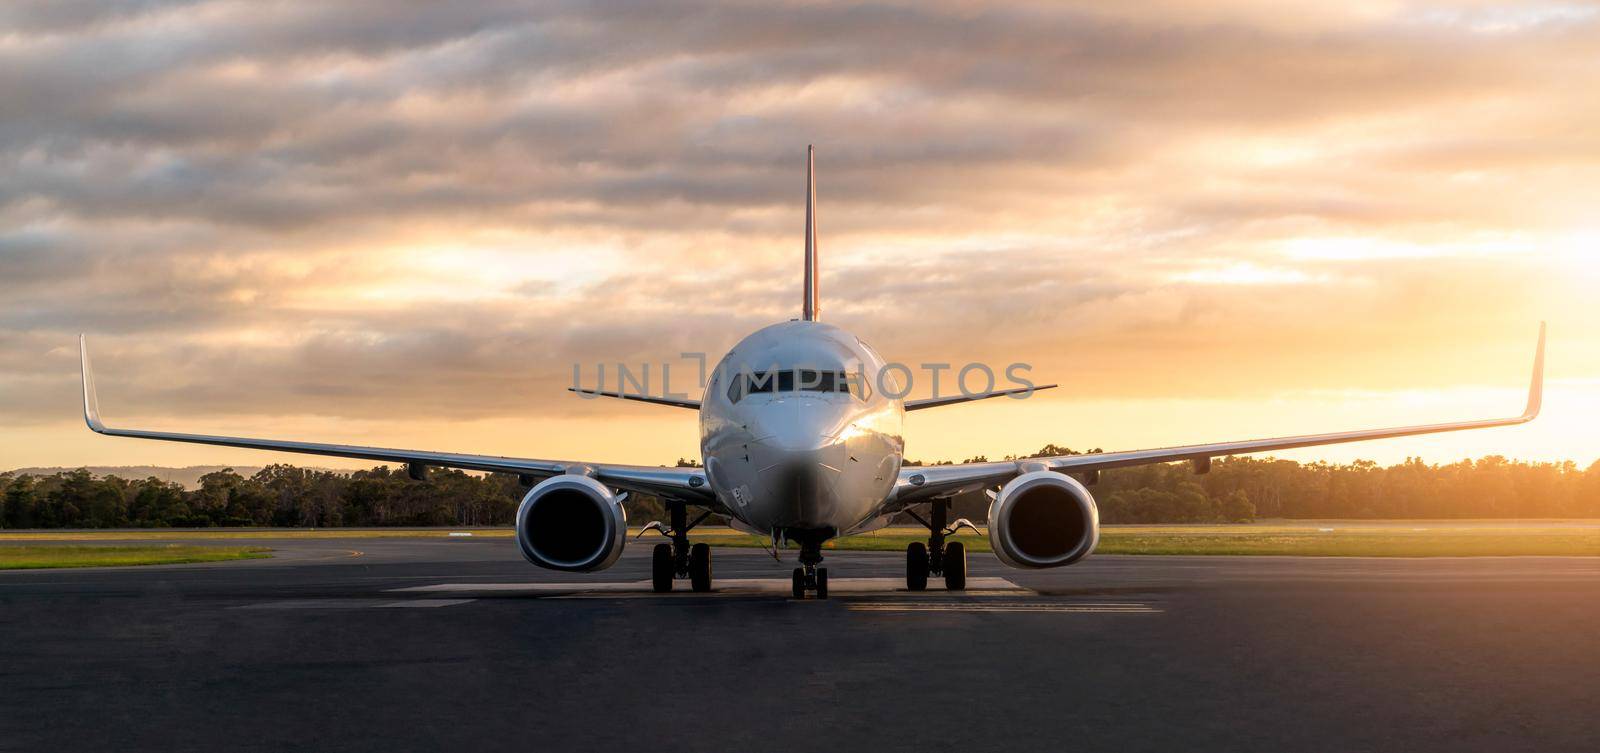 Airplane on Airport Runway at Sunset in Tasmania by biancoblue